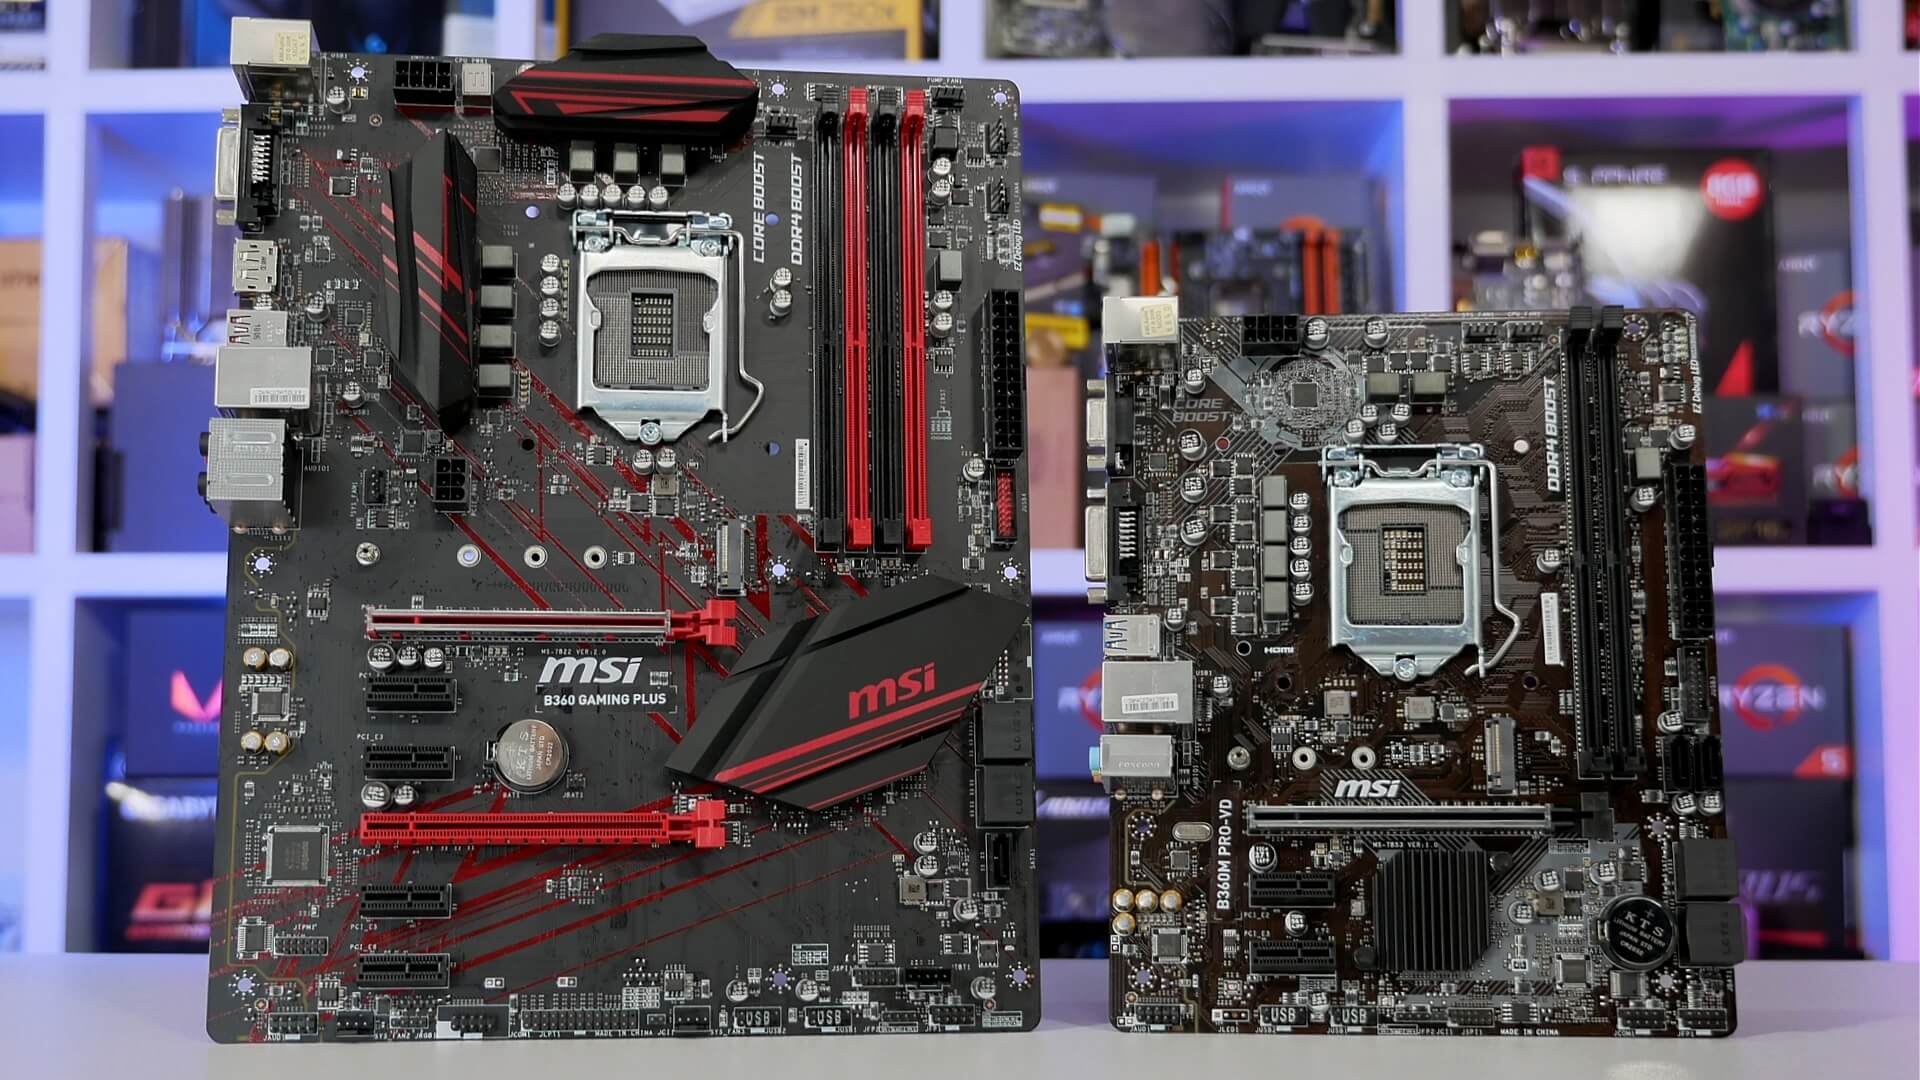 Intel discontinues 300-series chipset motherboards